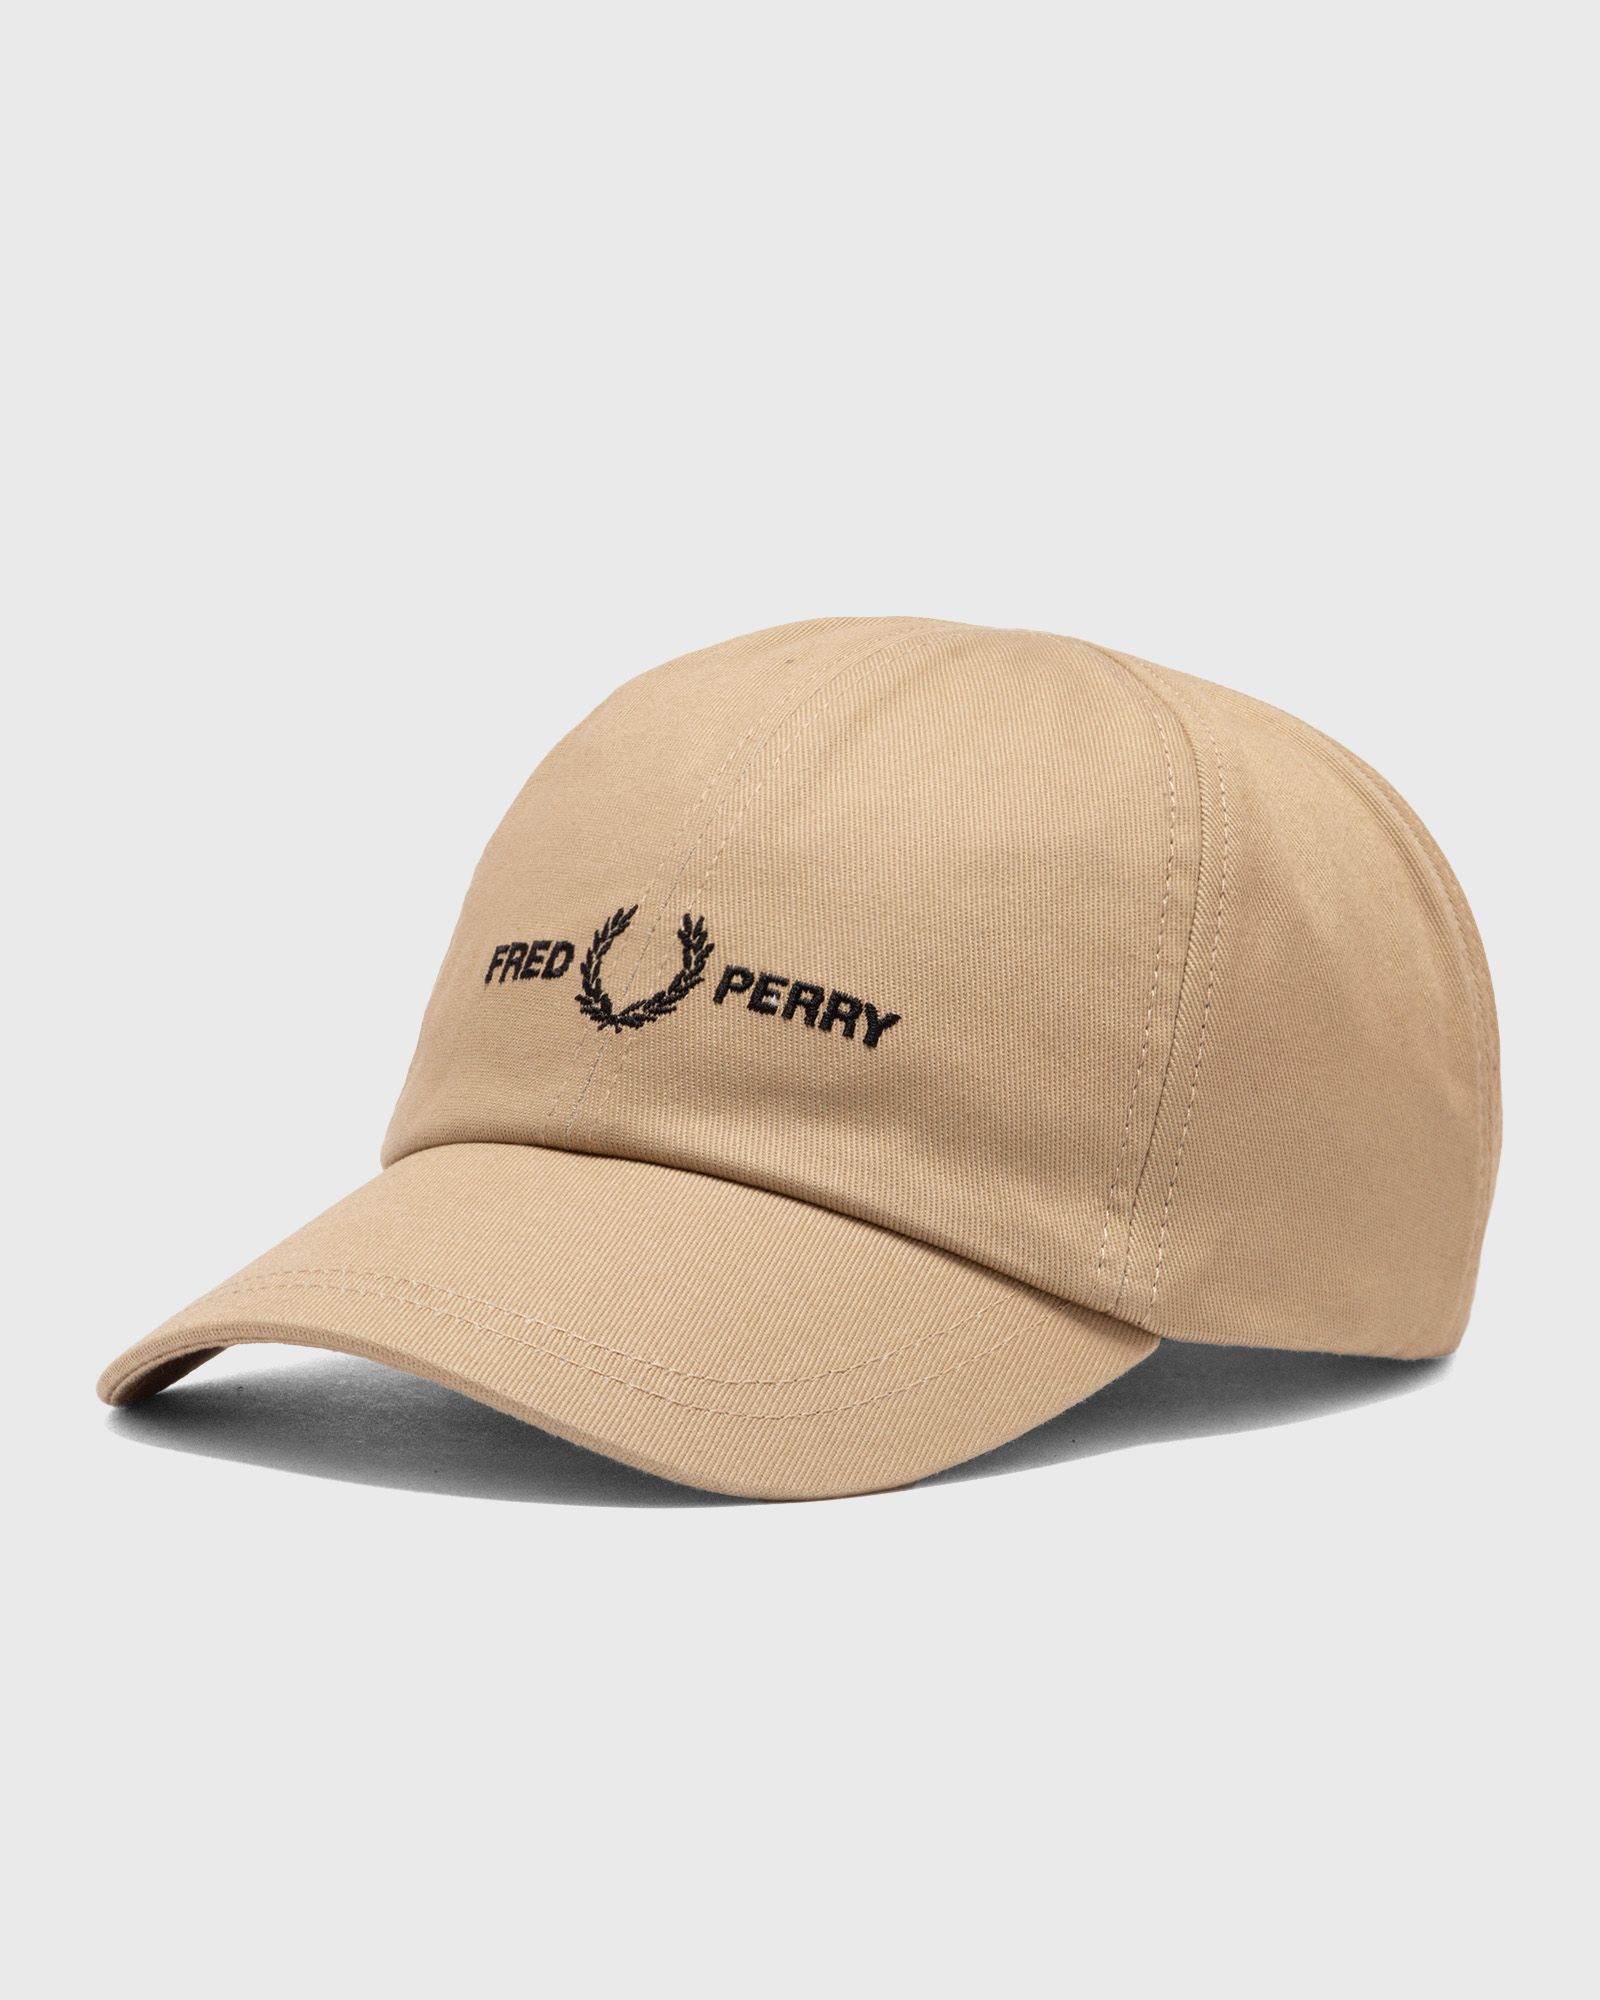 Fred Perry - graphic brended twill cap men caps brown in größe:one size